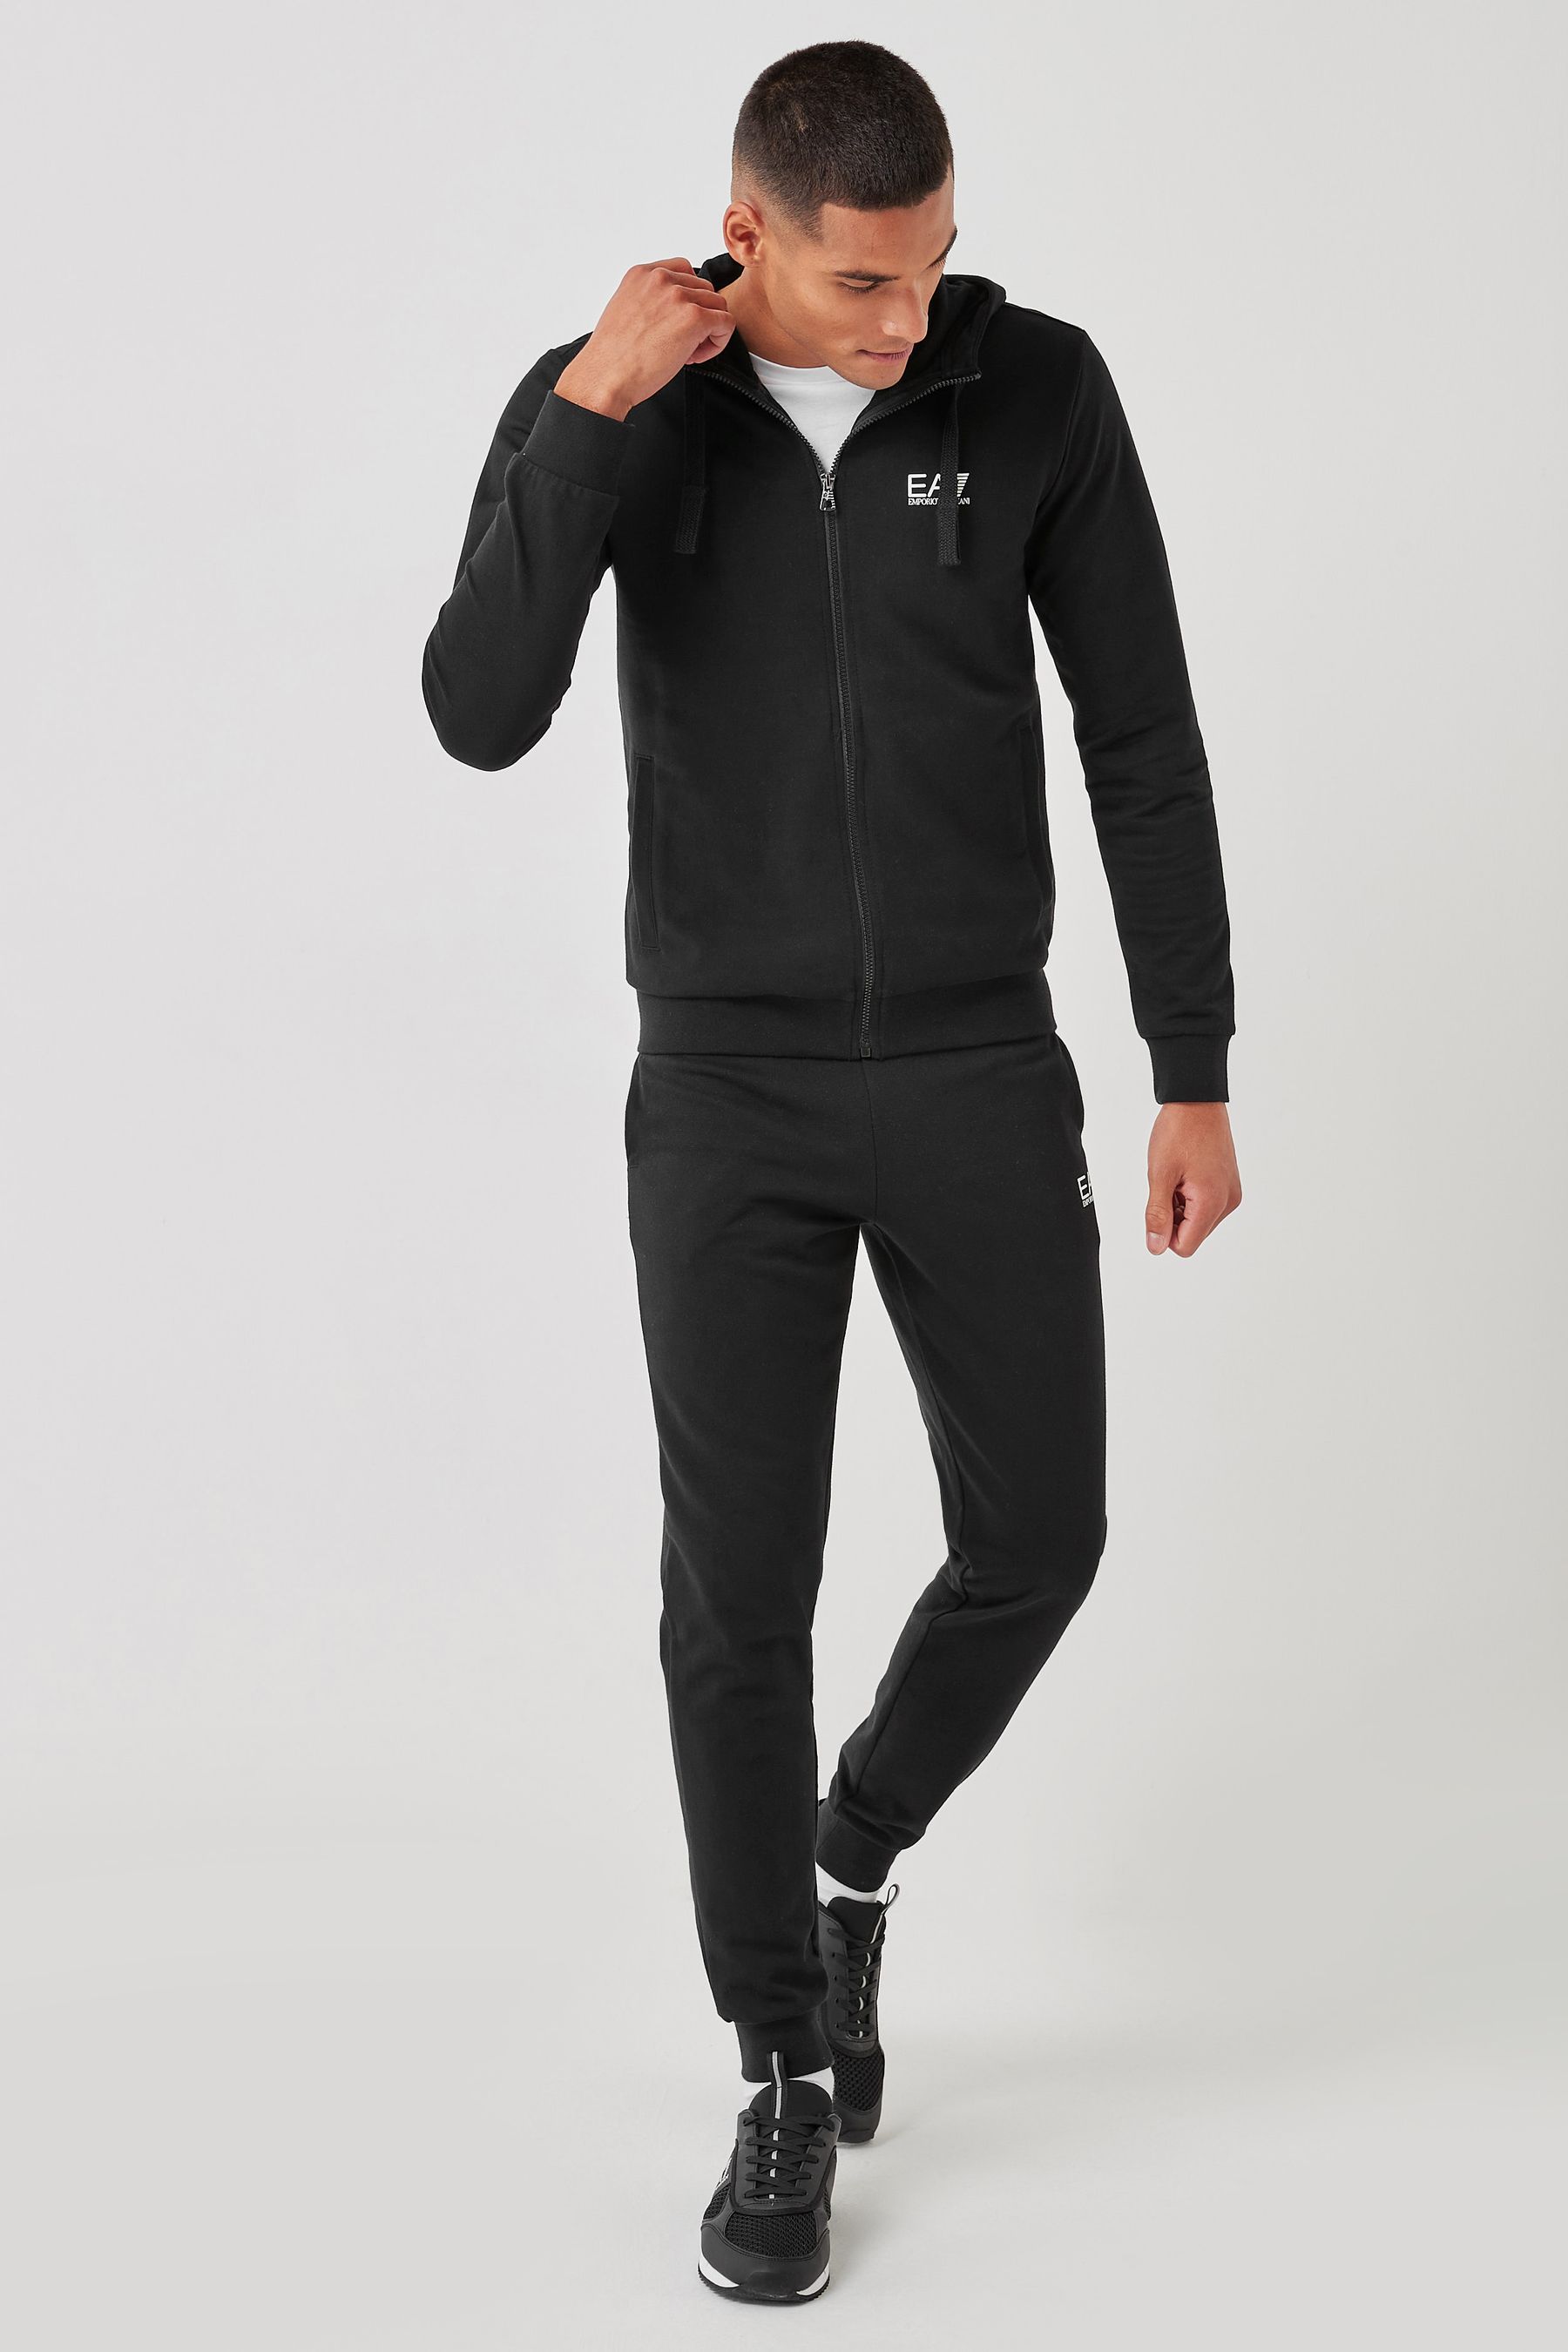 Buy Emporio Armani EA7 Core ID Tracksuit from the Next UK online shop